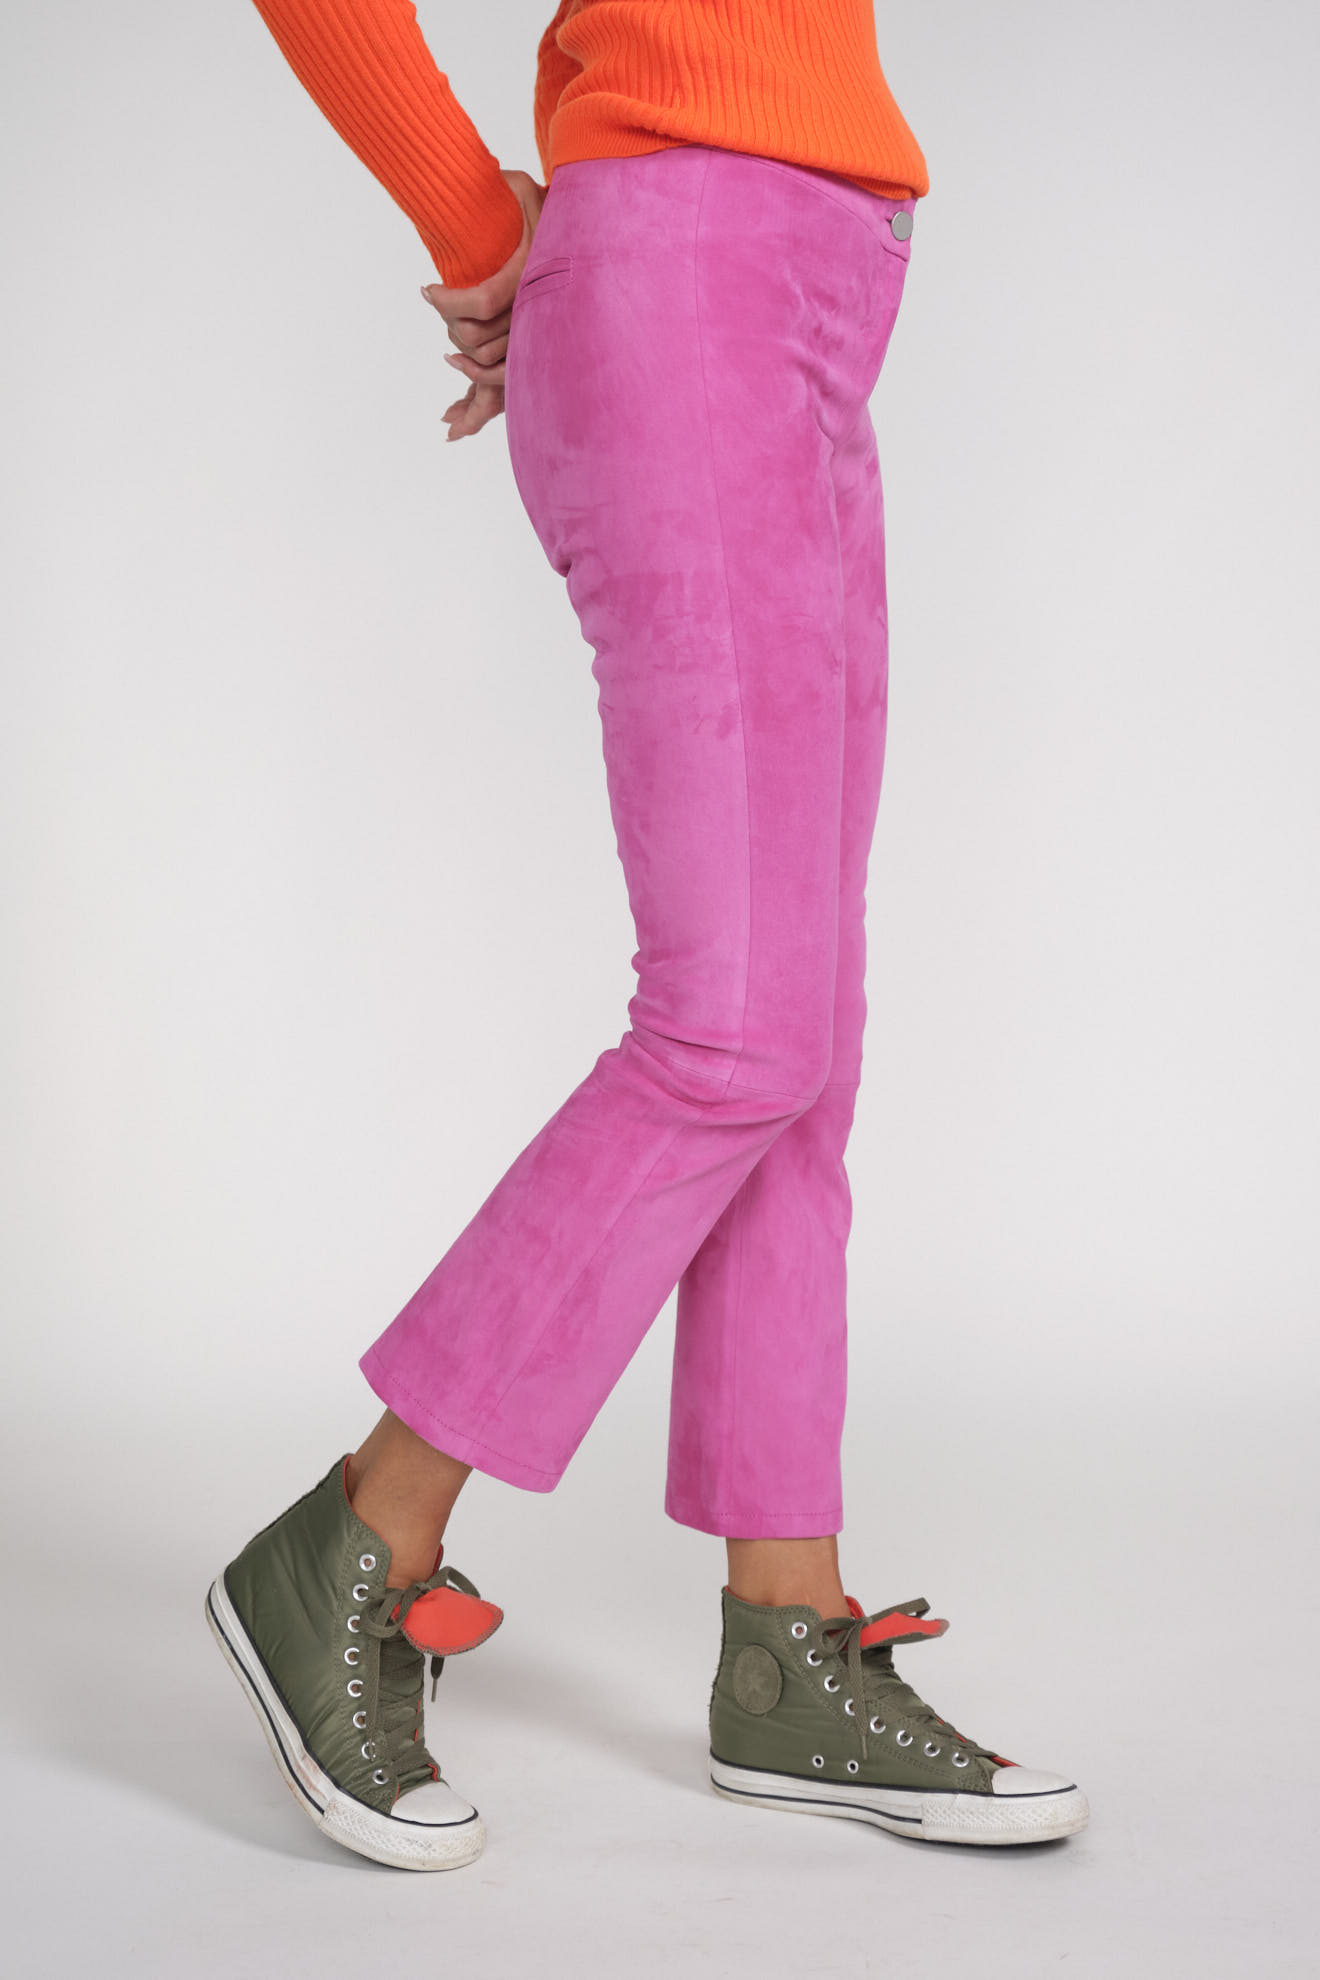 Arma Pants Lively pink 36